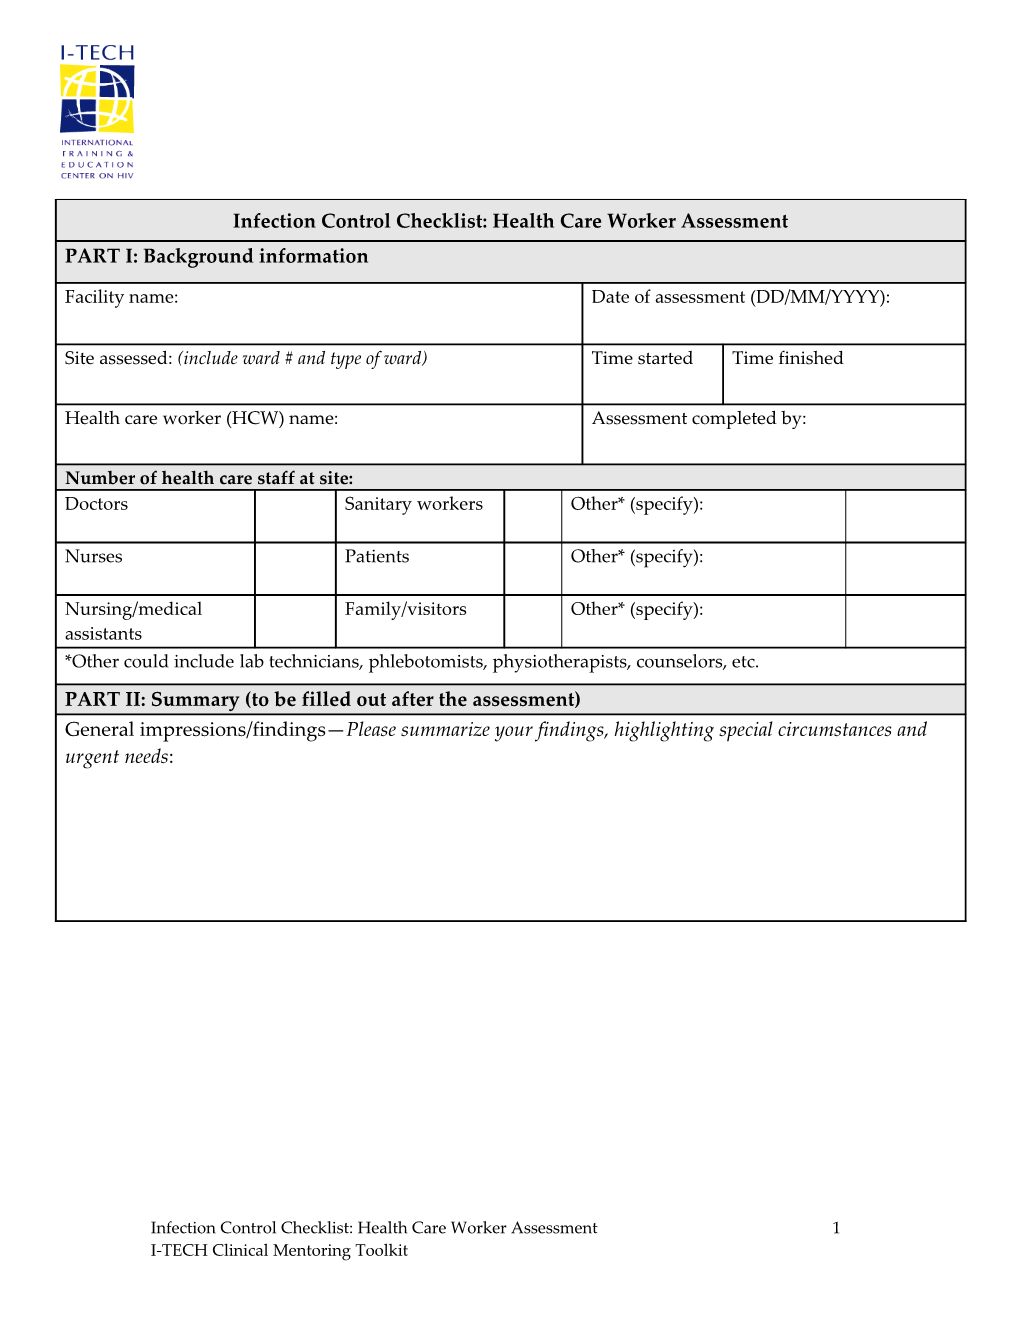 Infection Control Checklist Health Care Worker Assessment